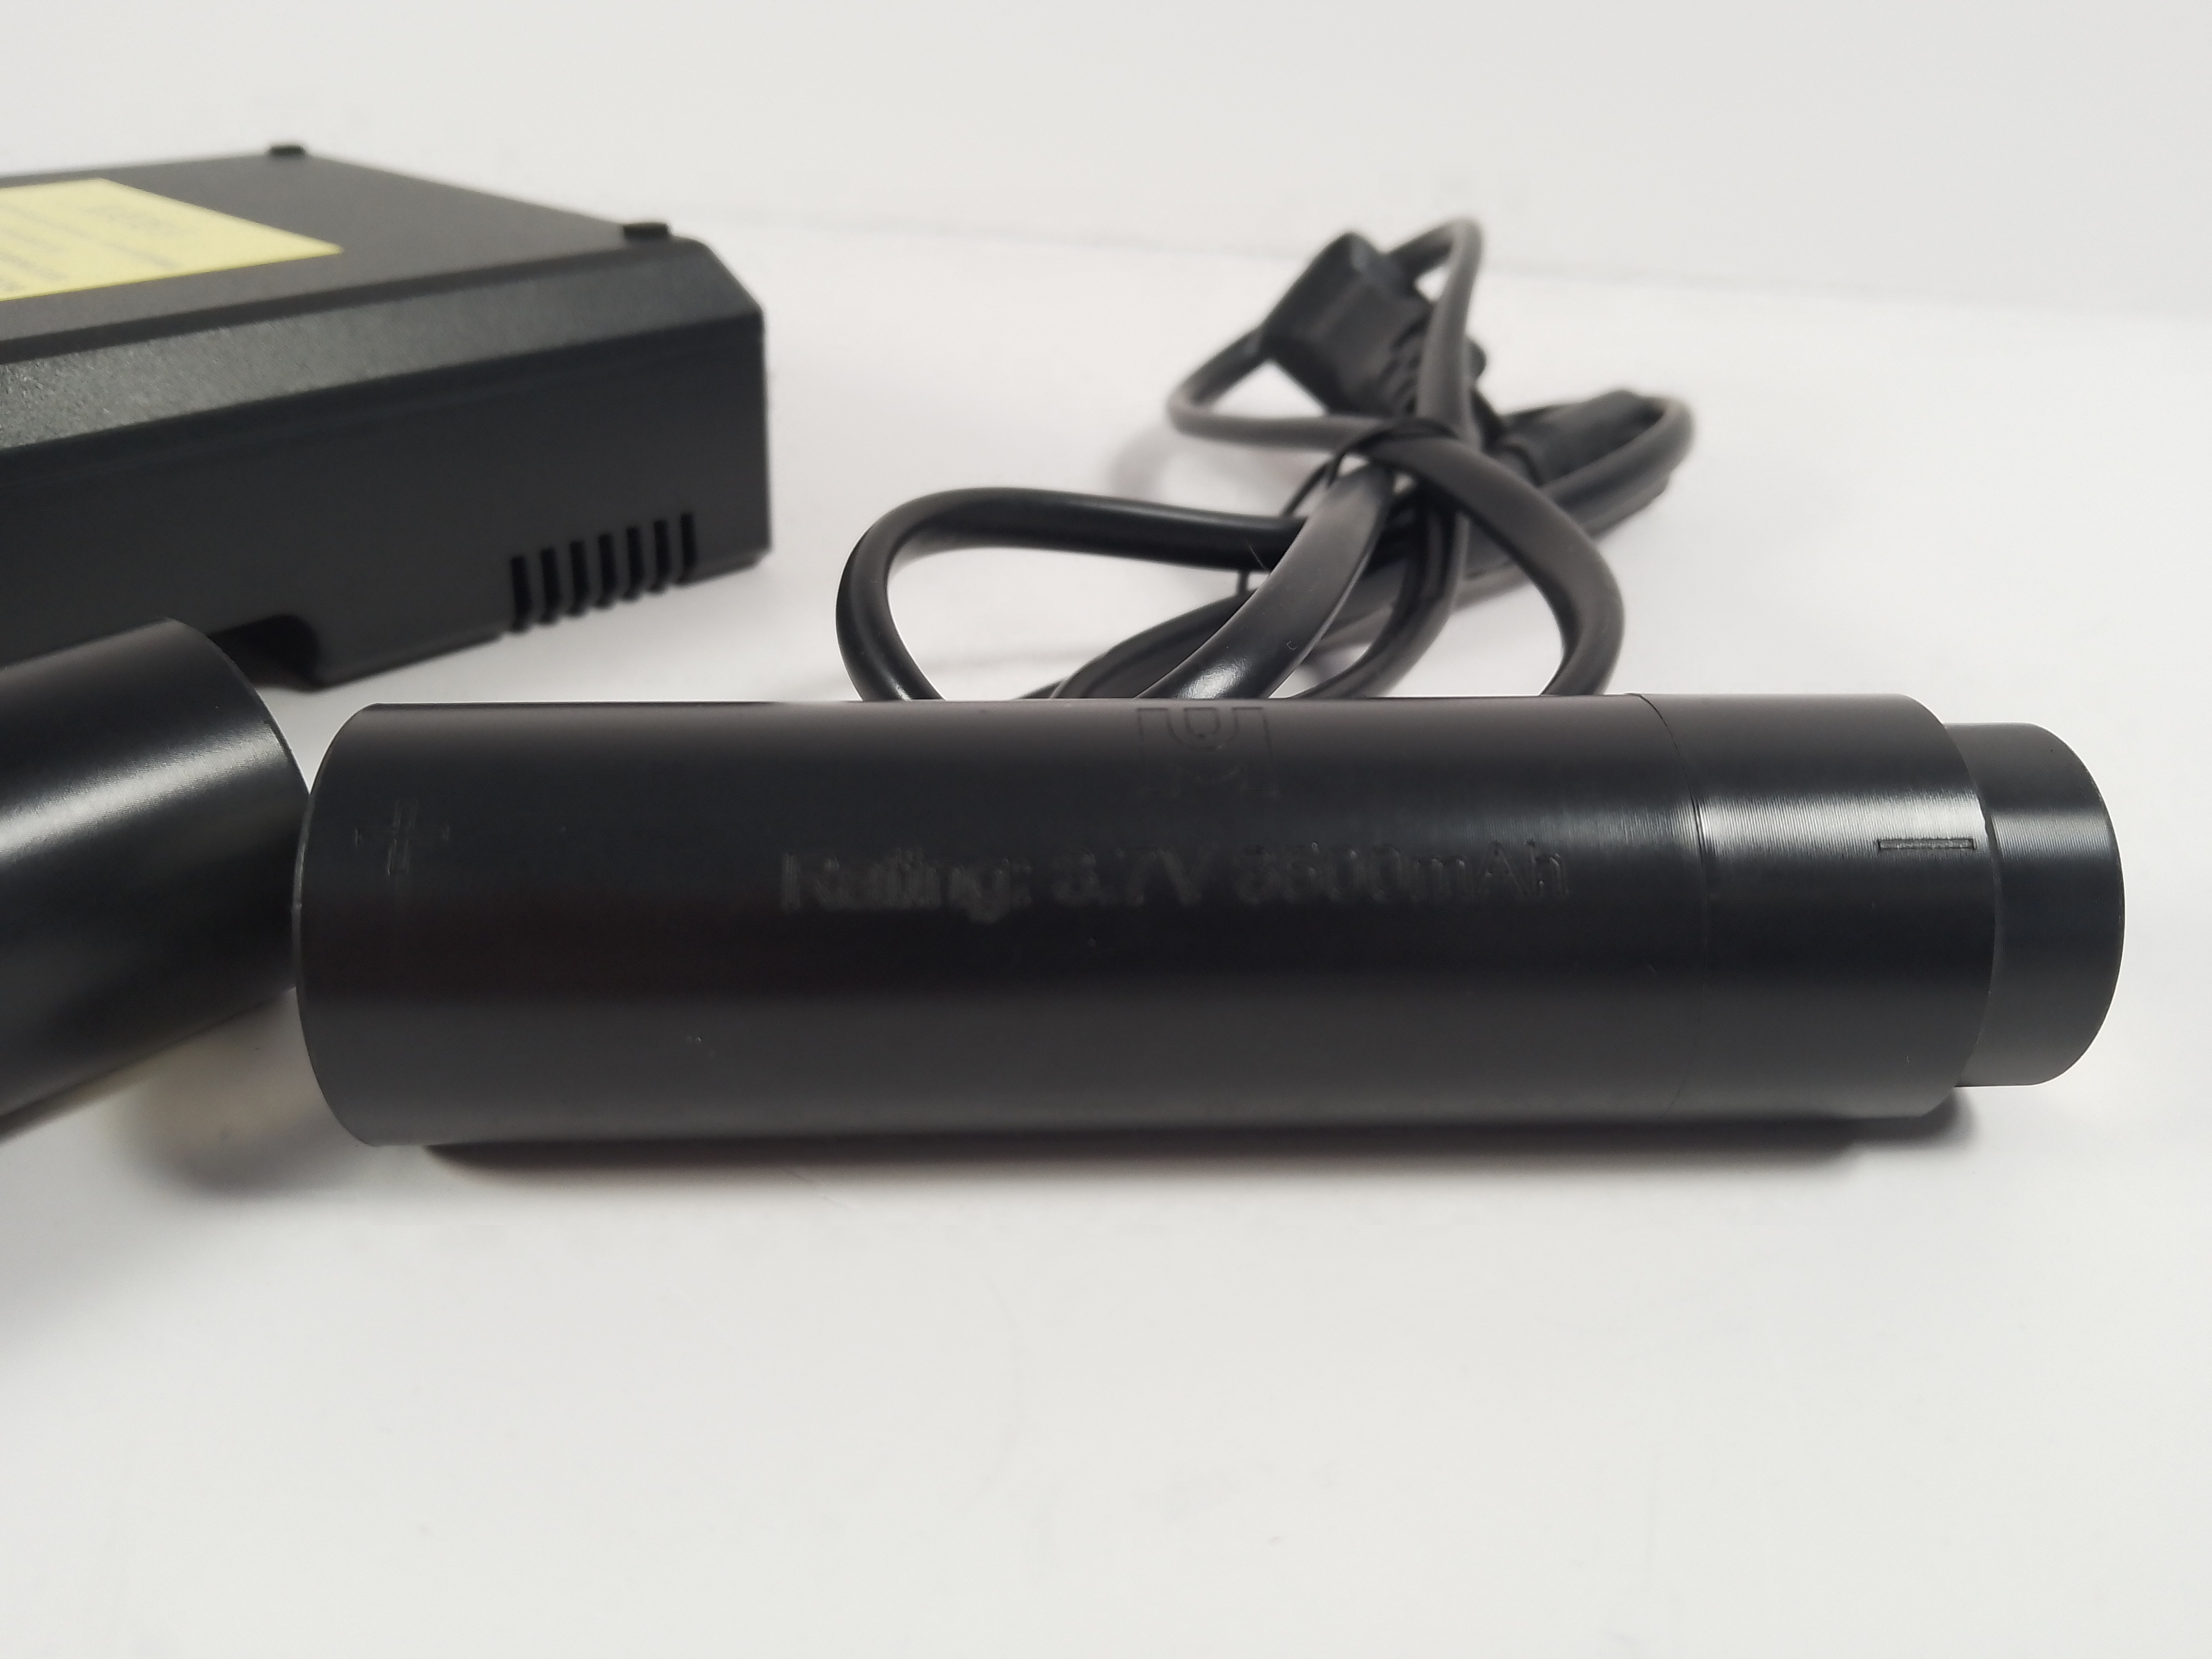 Rechargeable lithium battery & charge fot Transmiter